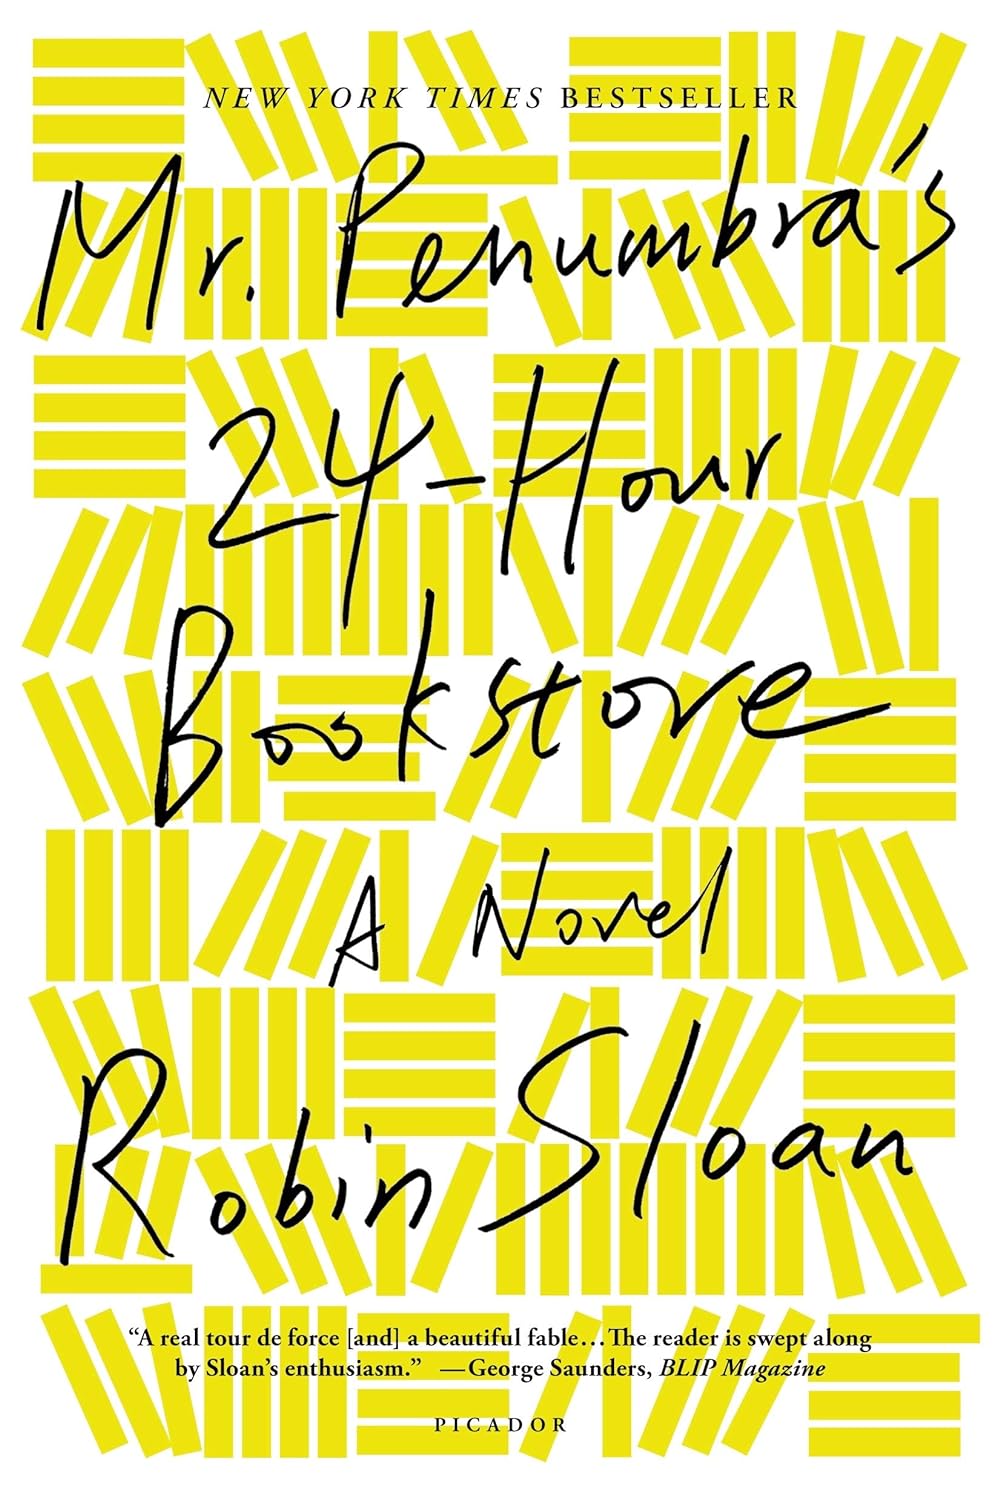 Cover of "Mr. Penumbra's 24-Hour Bookstore" by Robin Sloan